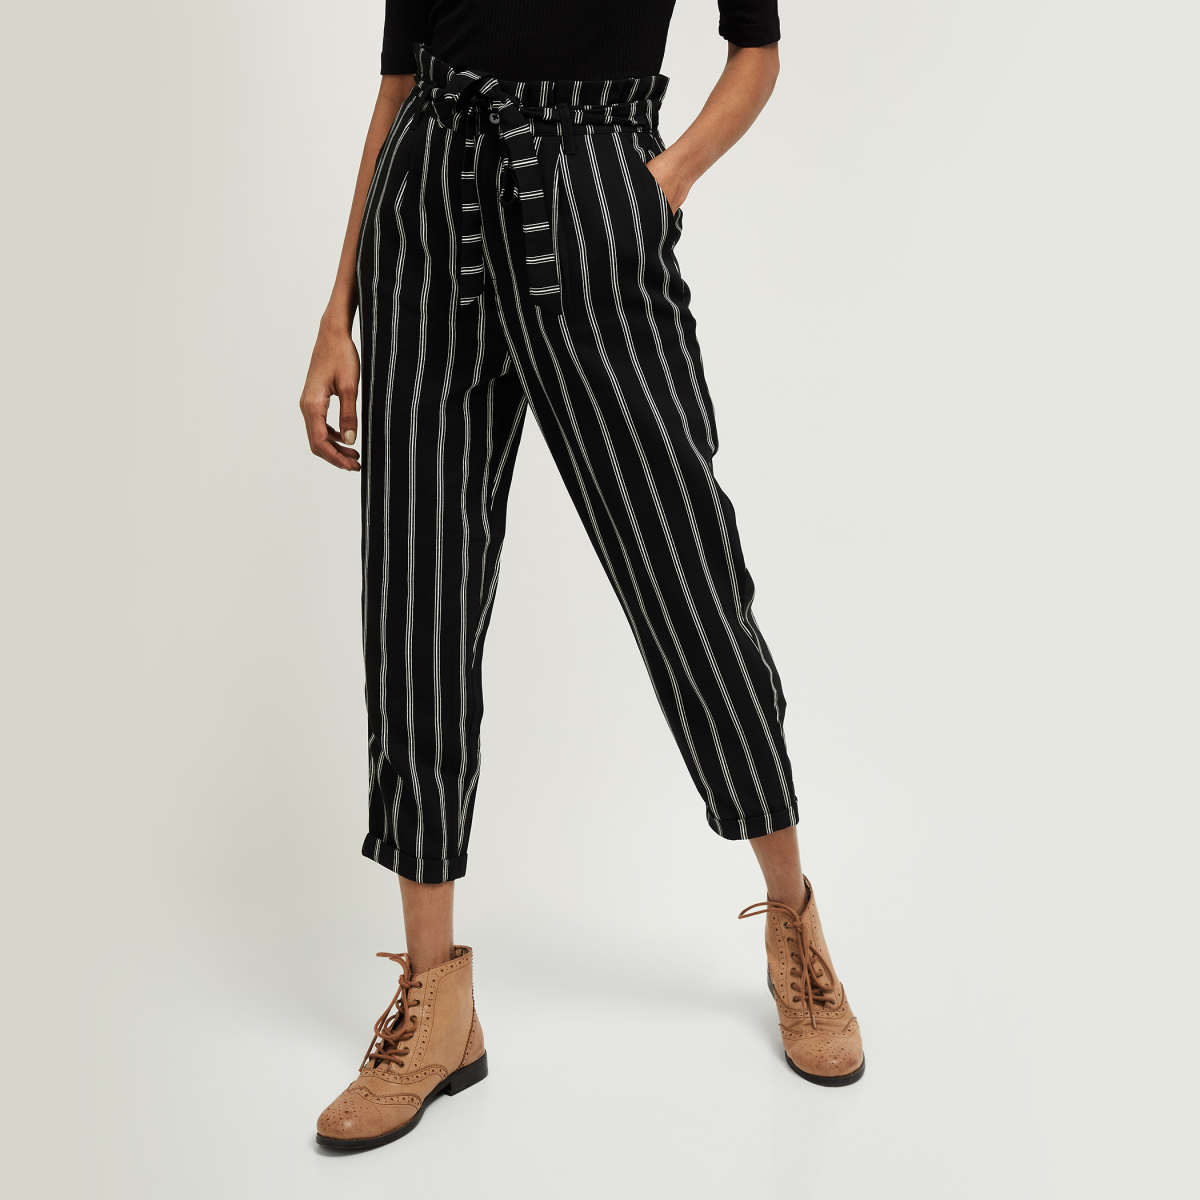 MAX Striped Ankle Length Pants